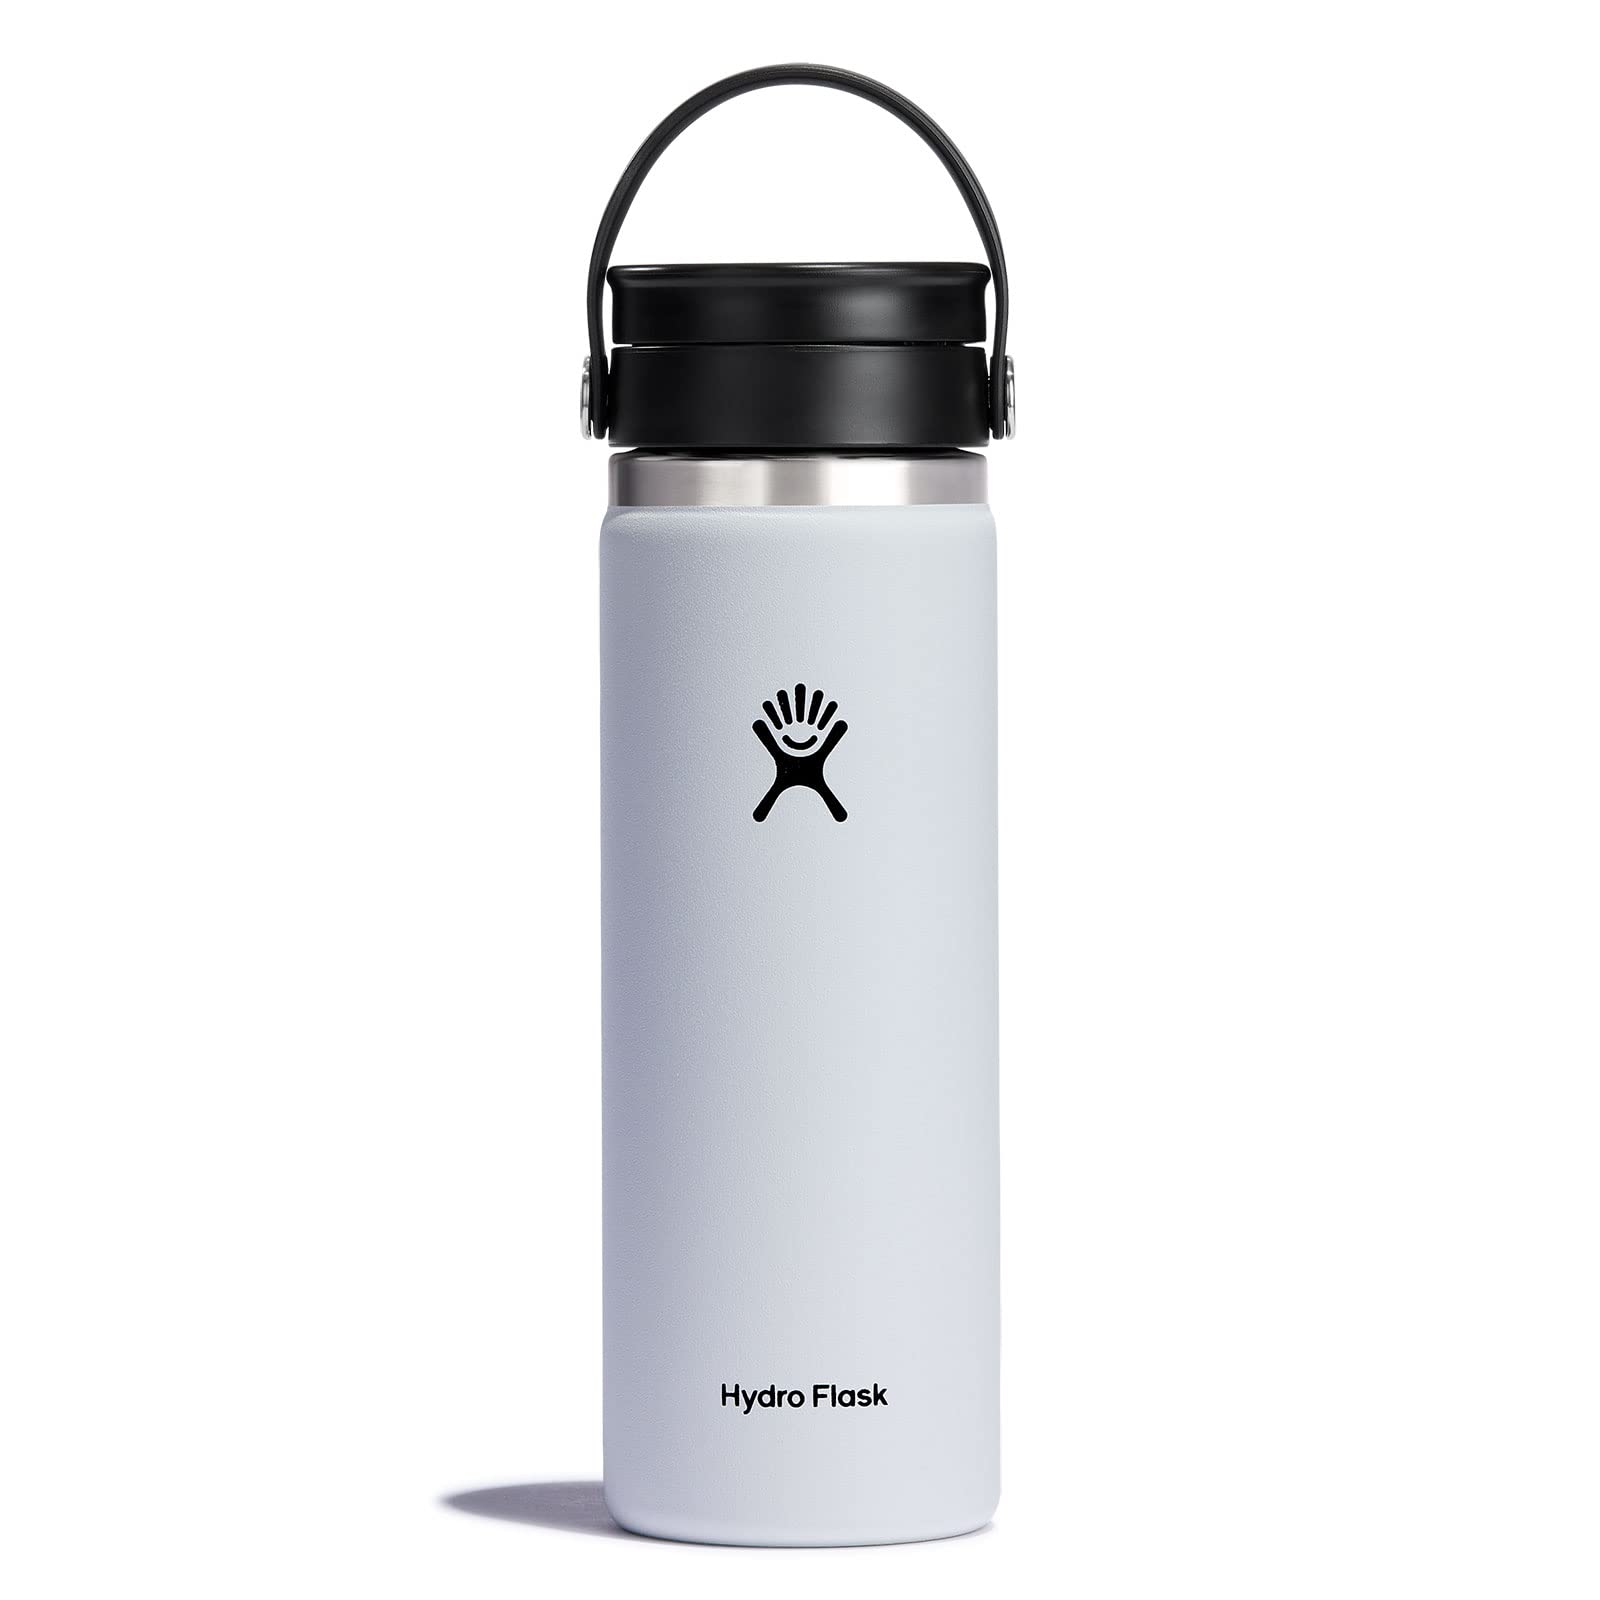 20-Ounce Hydro Flask Wide Mouth Bottle w/ Flex Sip Lid (White) $16.12 + Free Shipping w/ Prime or on orders over $35